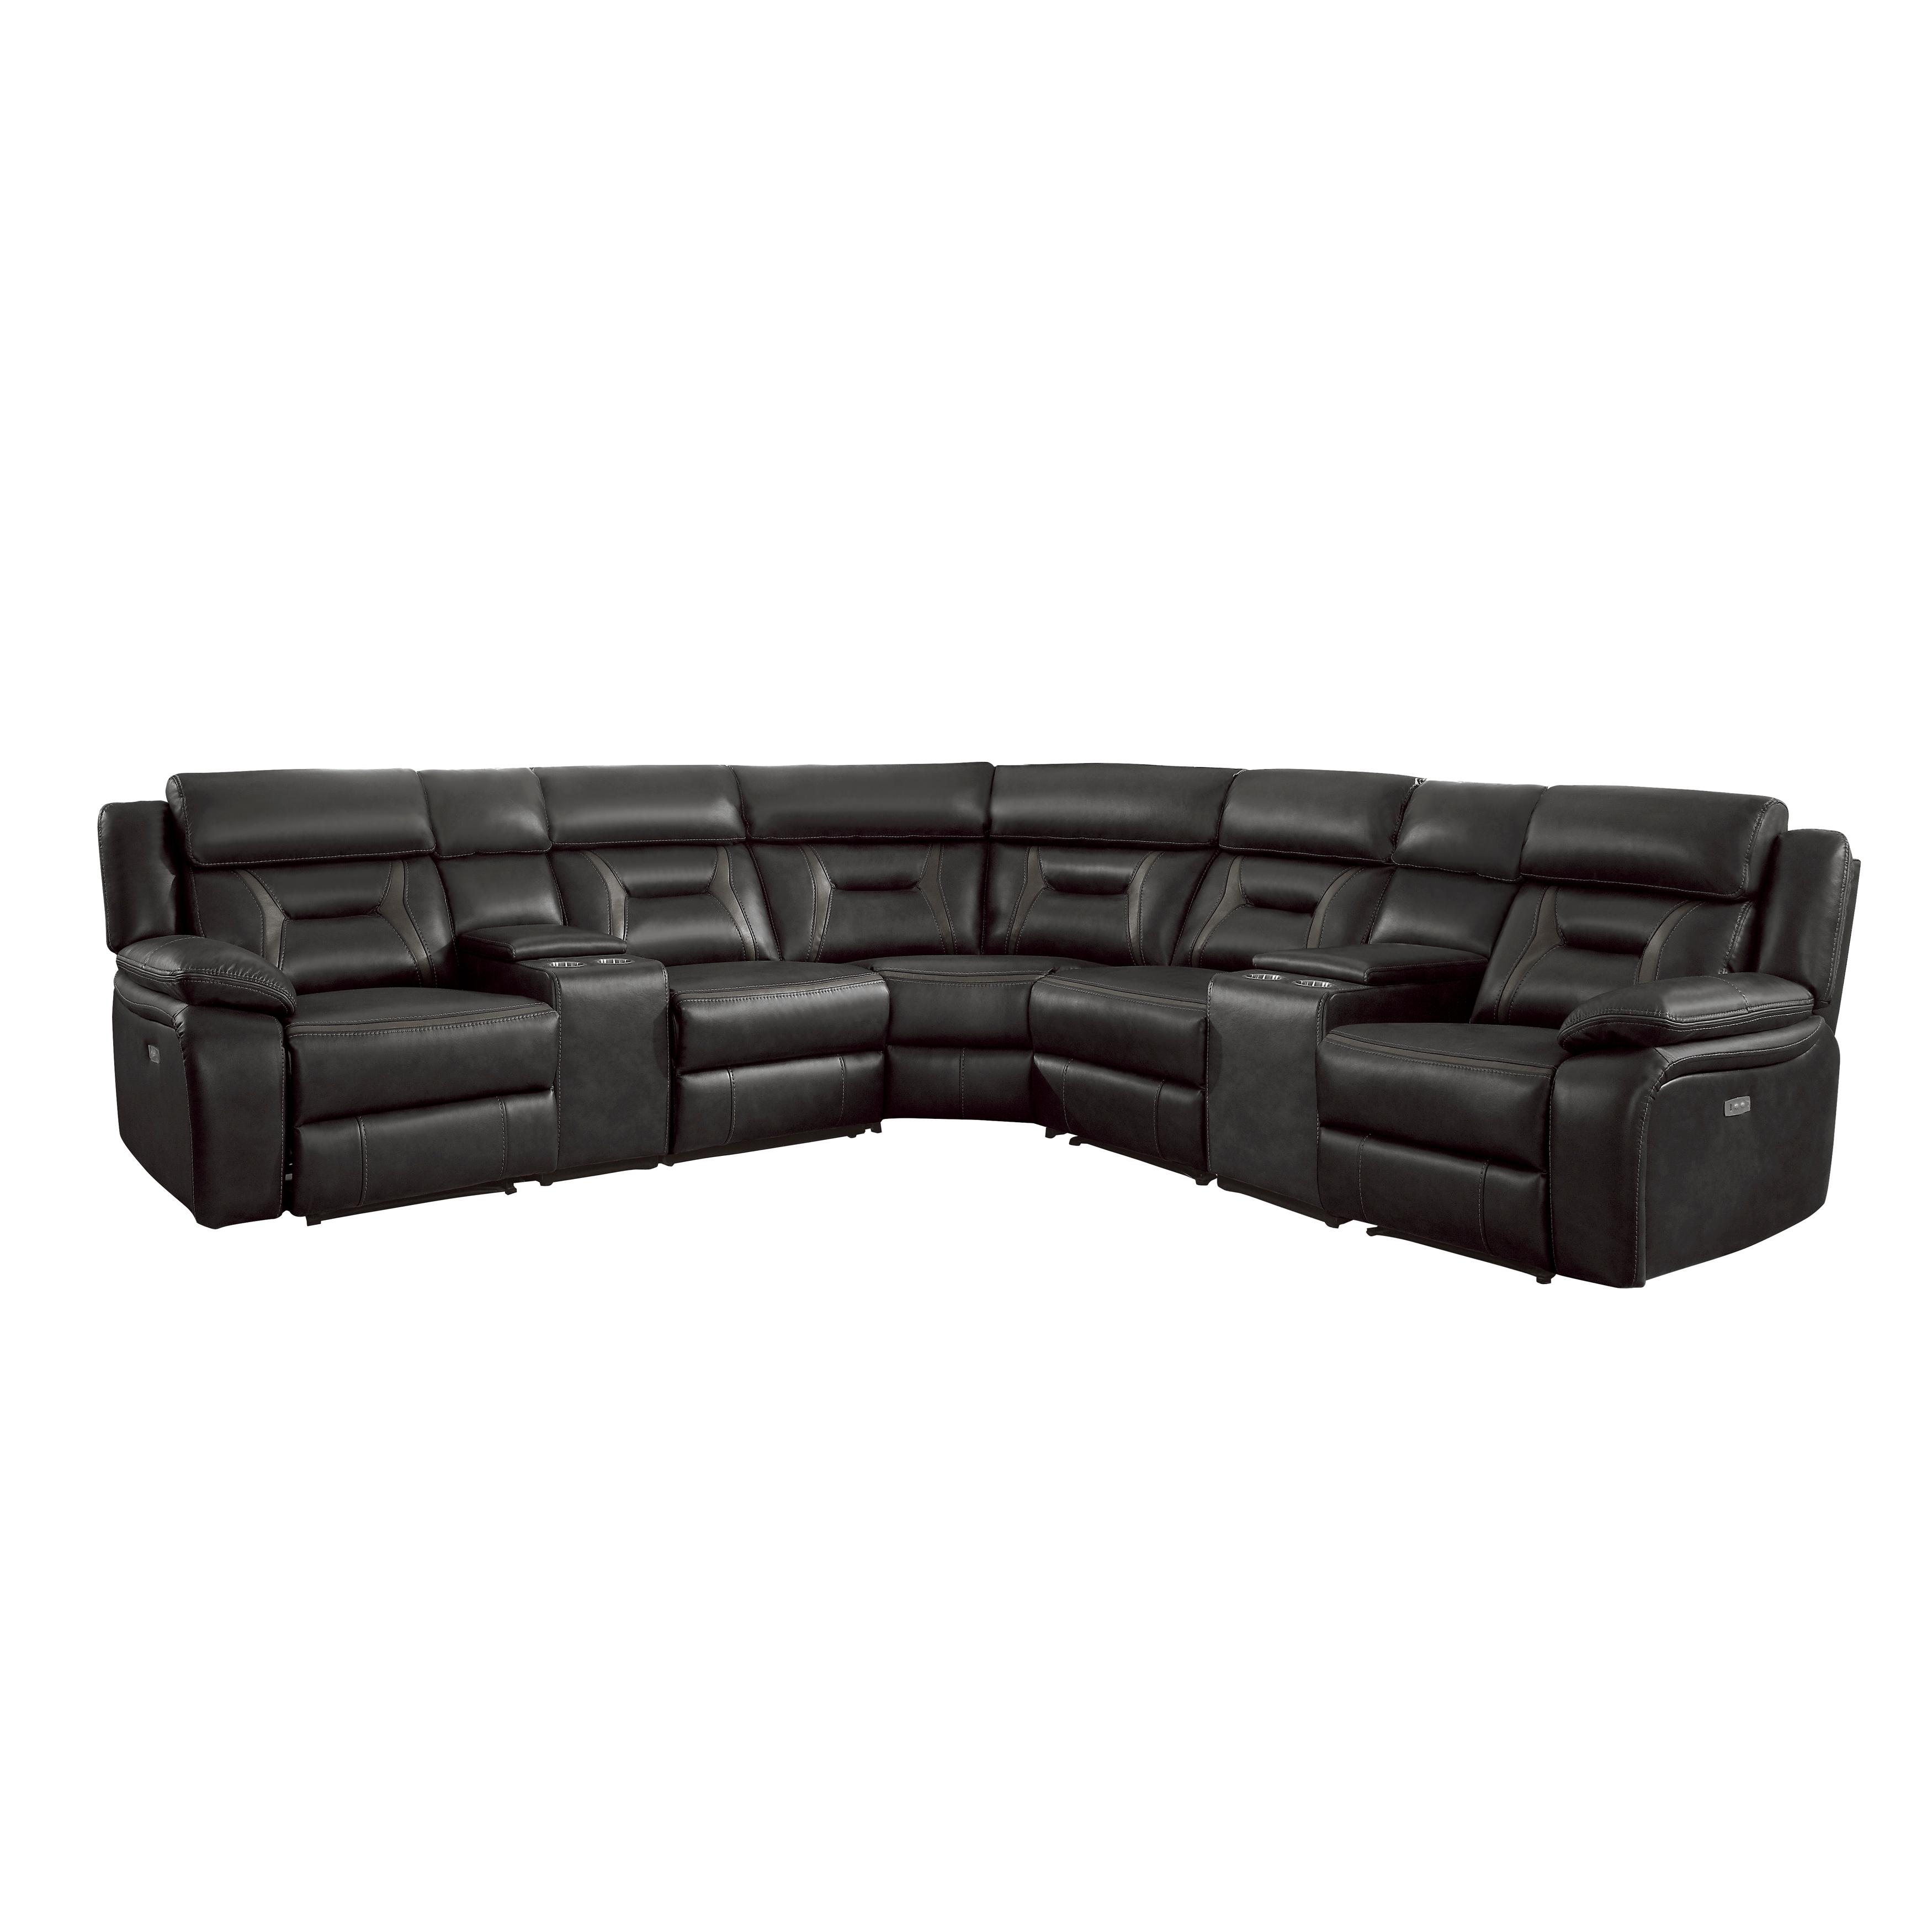 Modern Power Reclining Sectional 8229DG*7PW Amite 8229DG*7PW in Dark Gray Faux Leather